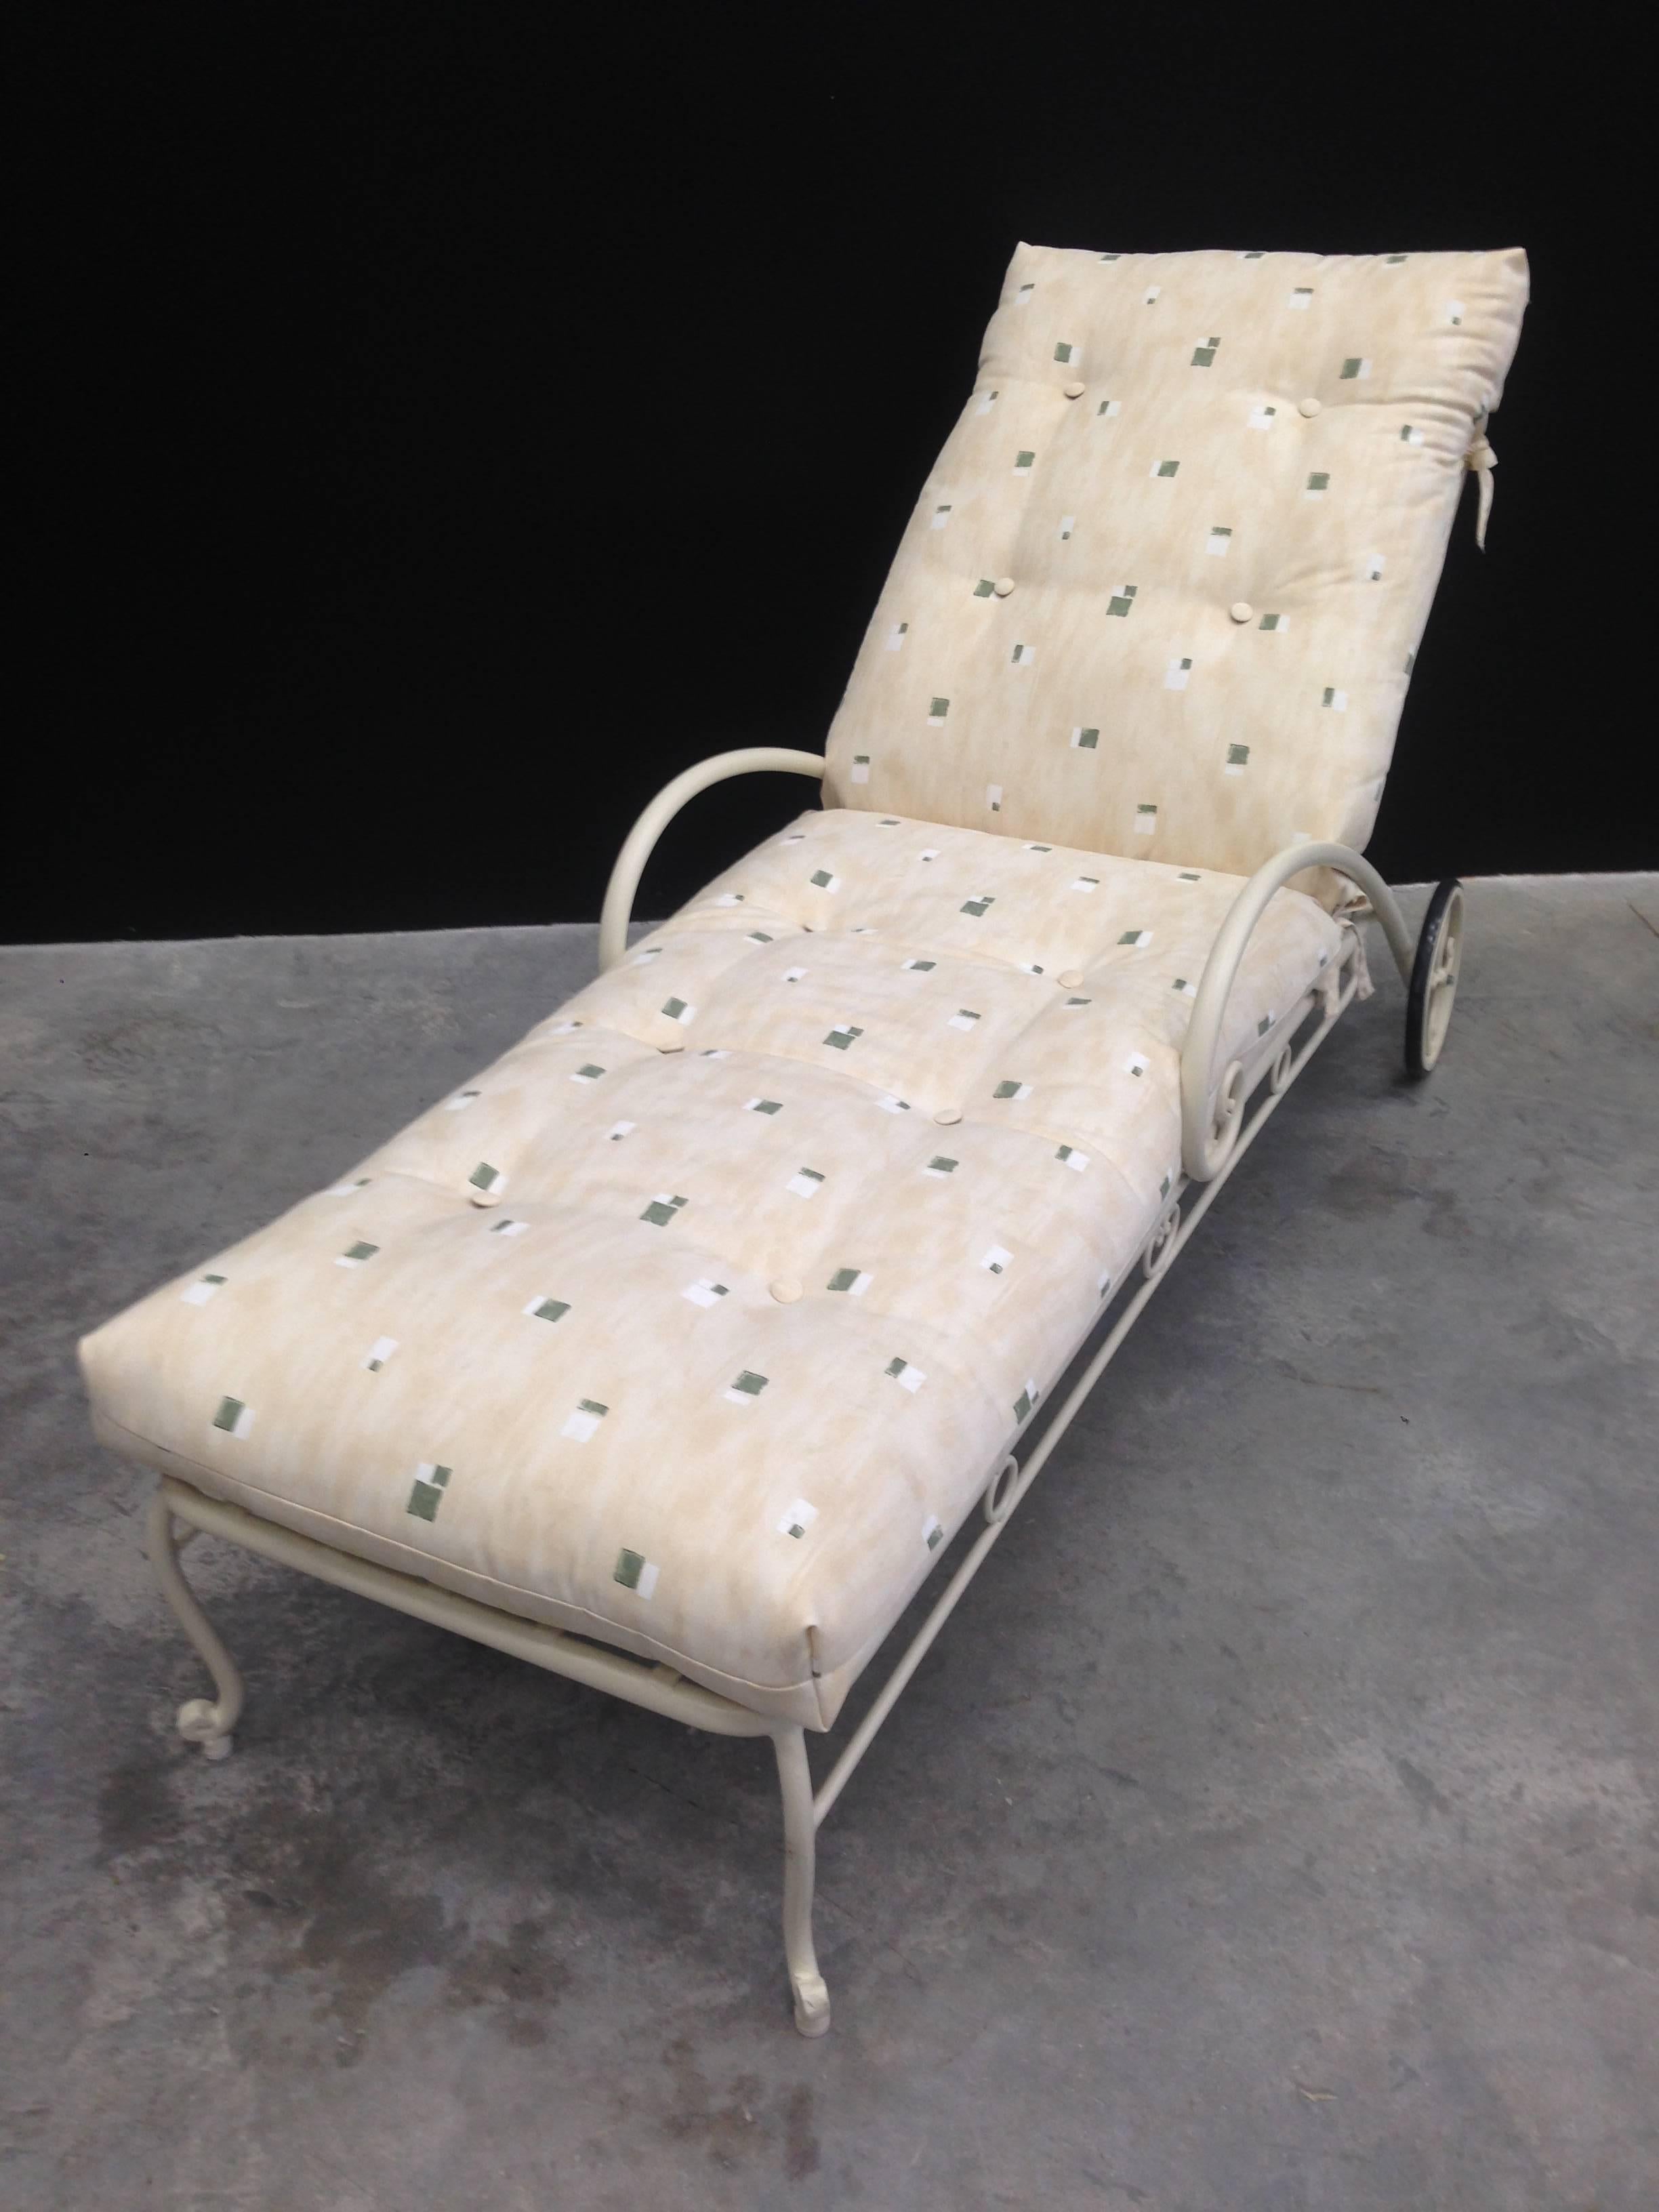 French Provincial Vintage French Style Wrought Iron Chaise Longue with Cushion For Sale